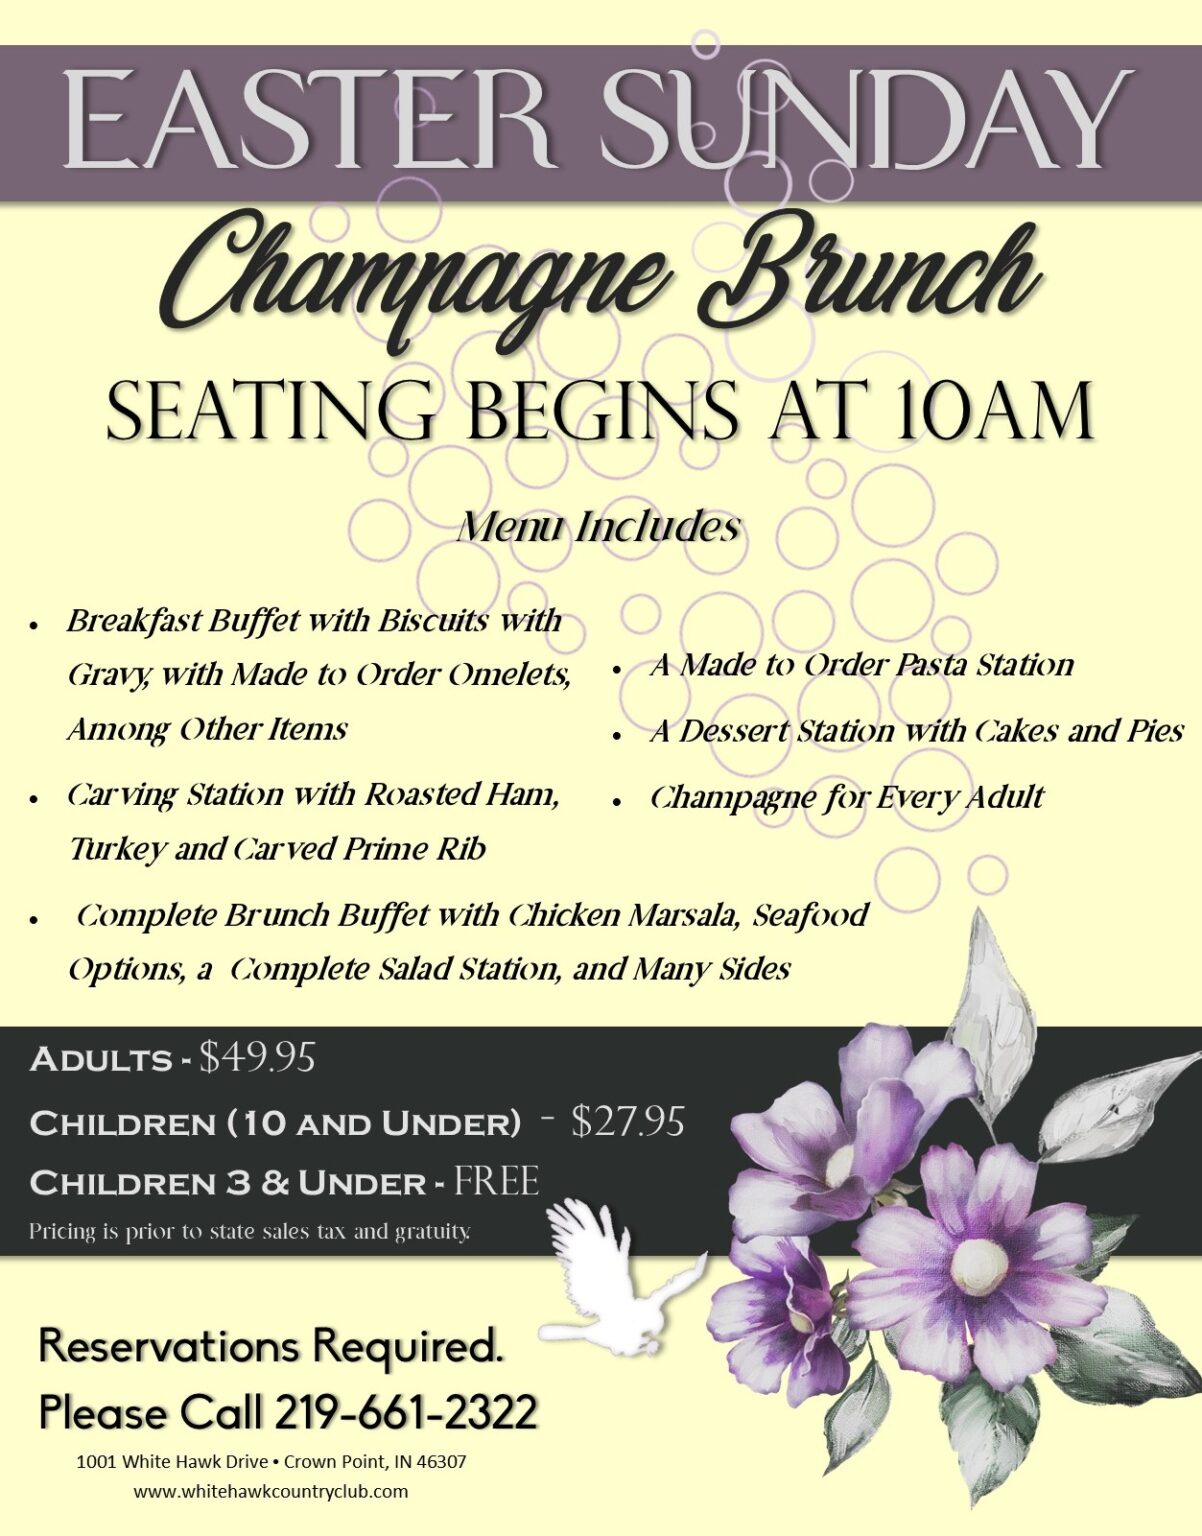 Easter Sunday Champagne Brunch White Hawk Country Club